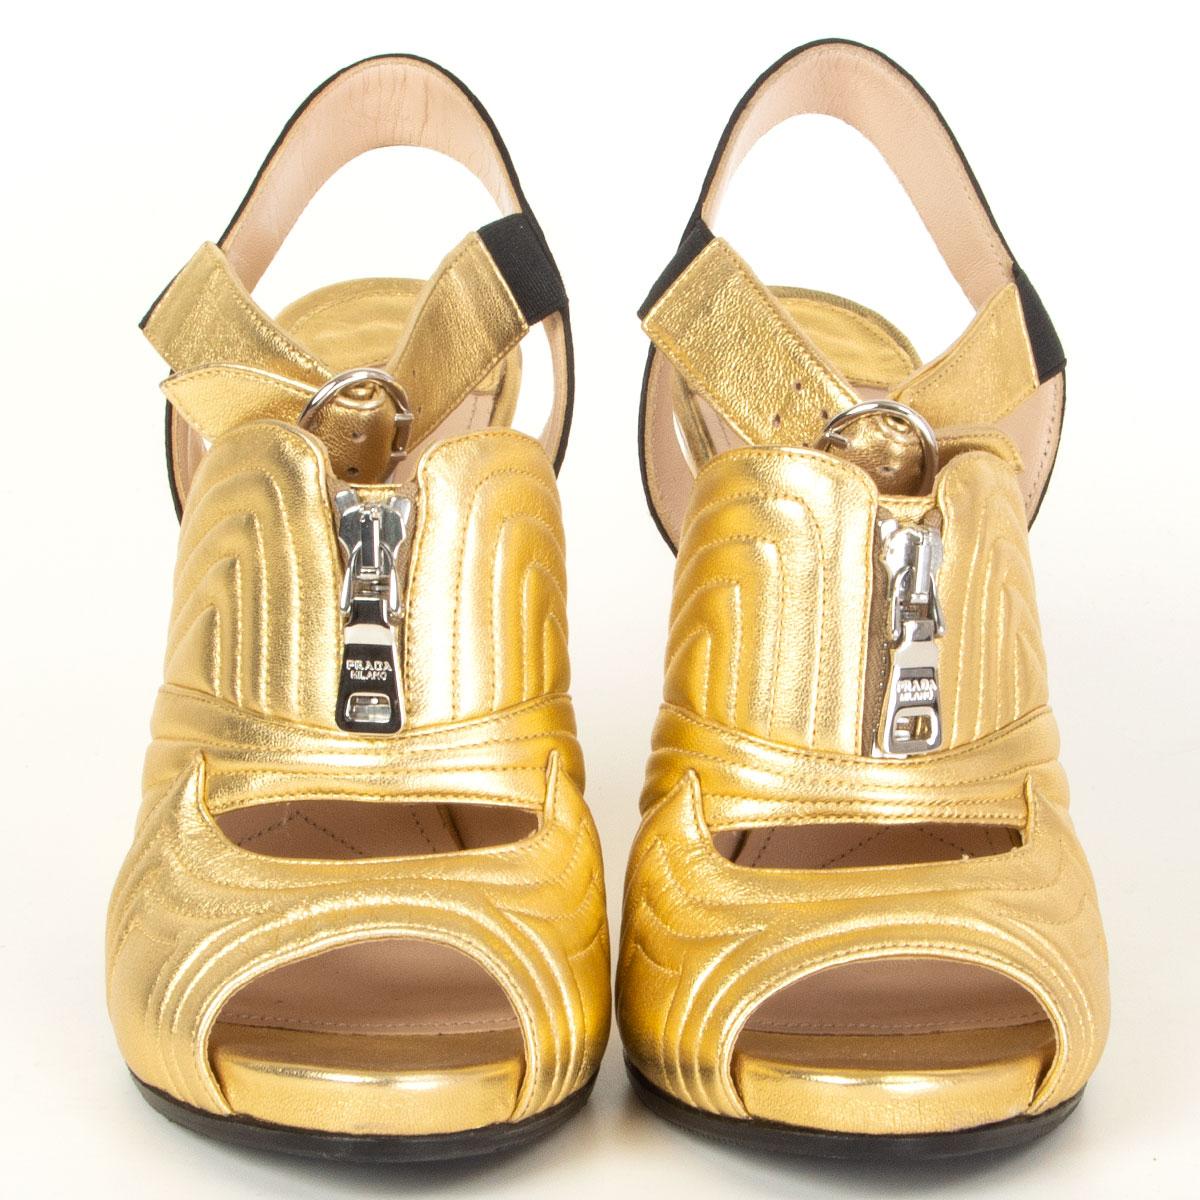 authentic Prada sandals in metallic gold-tone calfskin and black satin heel strap featuring a chunky heel and silver-tone zipper detail. Have been worn and are in excellent condition. Rubber sole has been added. 

Imprinted Size 36.5
Shoe Size